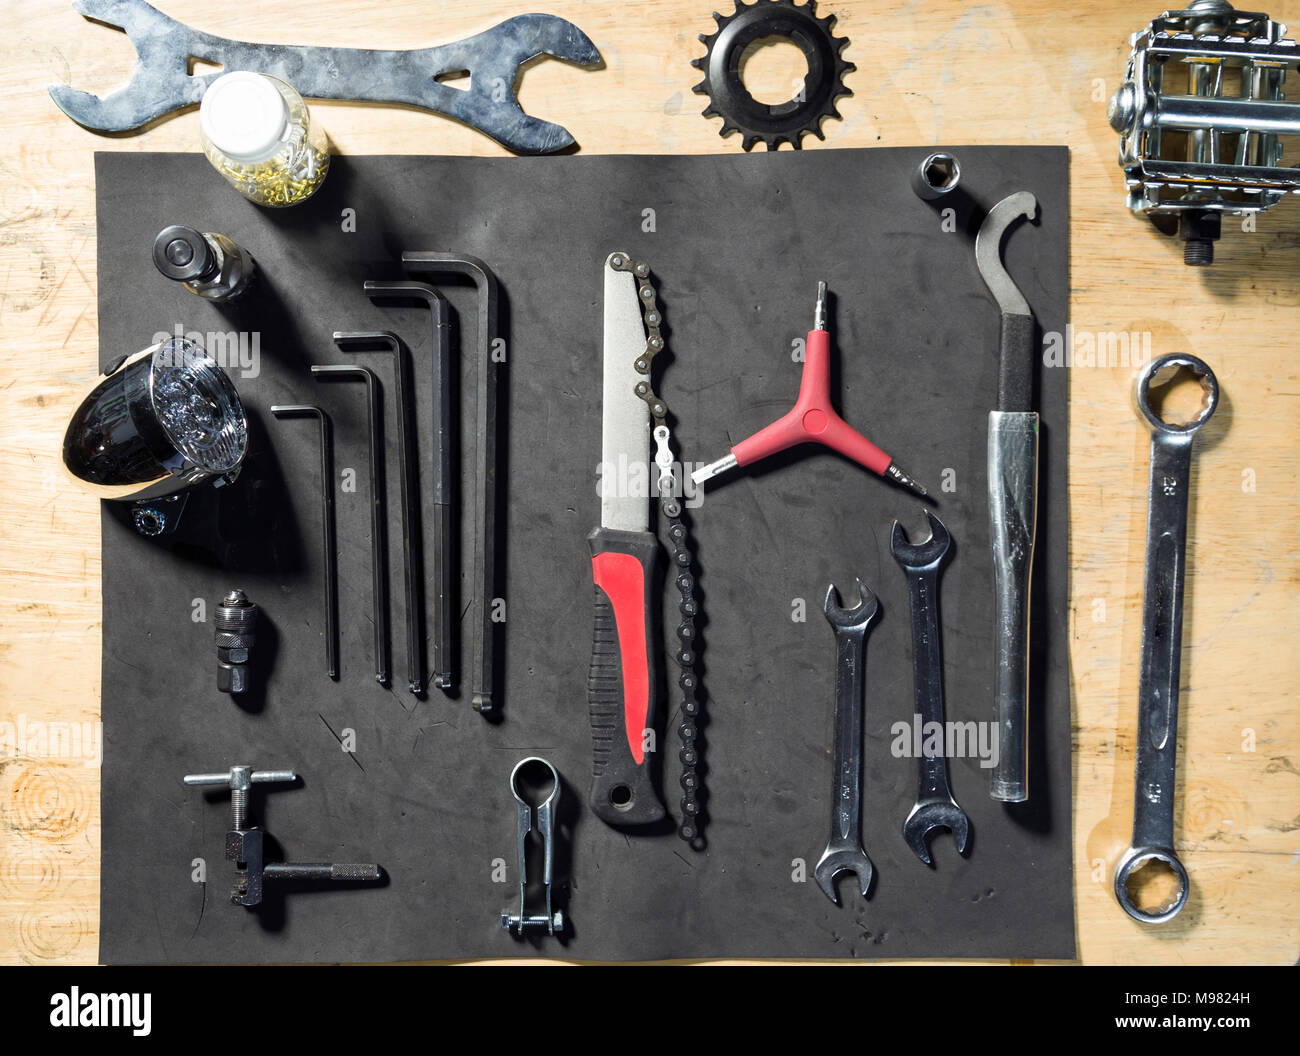 Overhead view of bicycle tool set Stock Photo